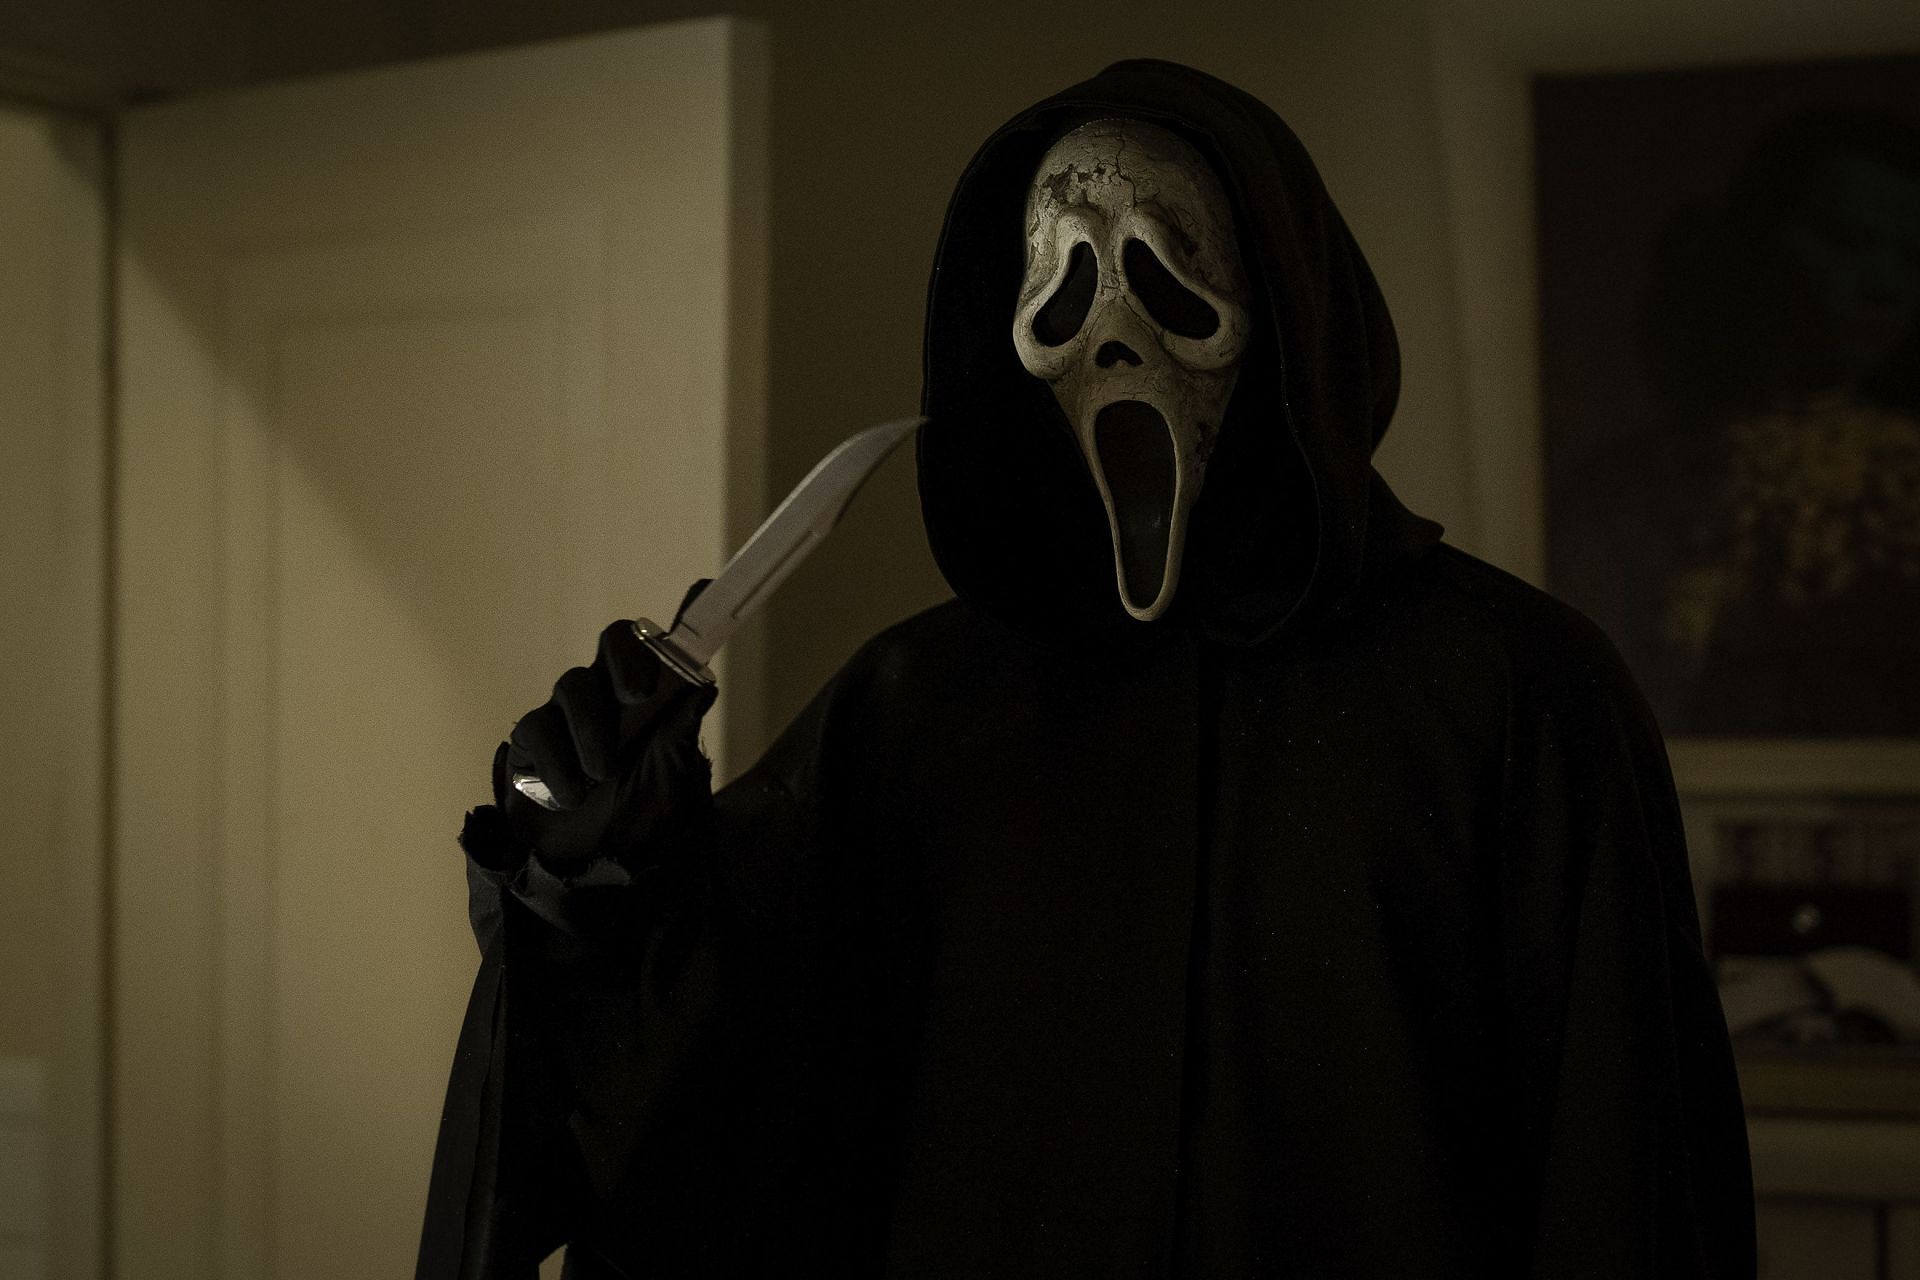 Will the fate of Ghostface finally be determined? Fans are eagerly anticipating the release of Scream 6 after a leaked plot reveals major twists and turns in the movie